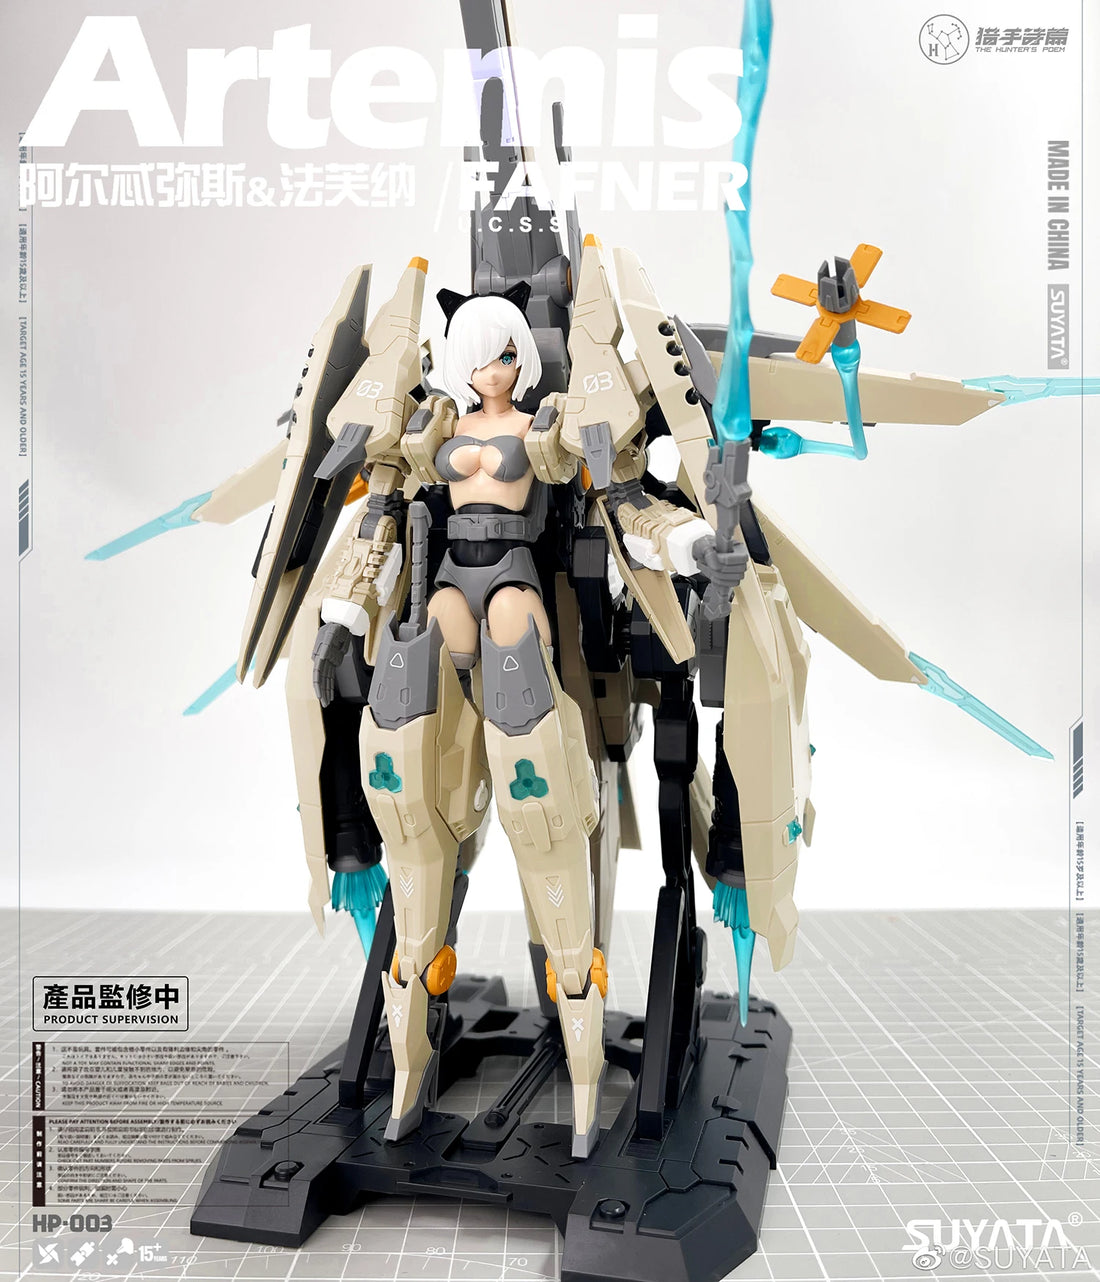 COMIC CLUB IN-STOCK THE HUNTER'S POEM 1/12 MS Girl HP-003 Artemis Fafner By SUYATA Assembly Model Action Robot Toys Figure